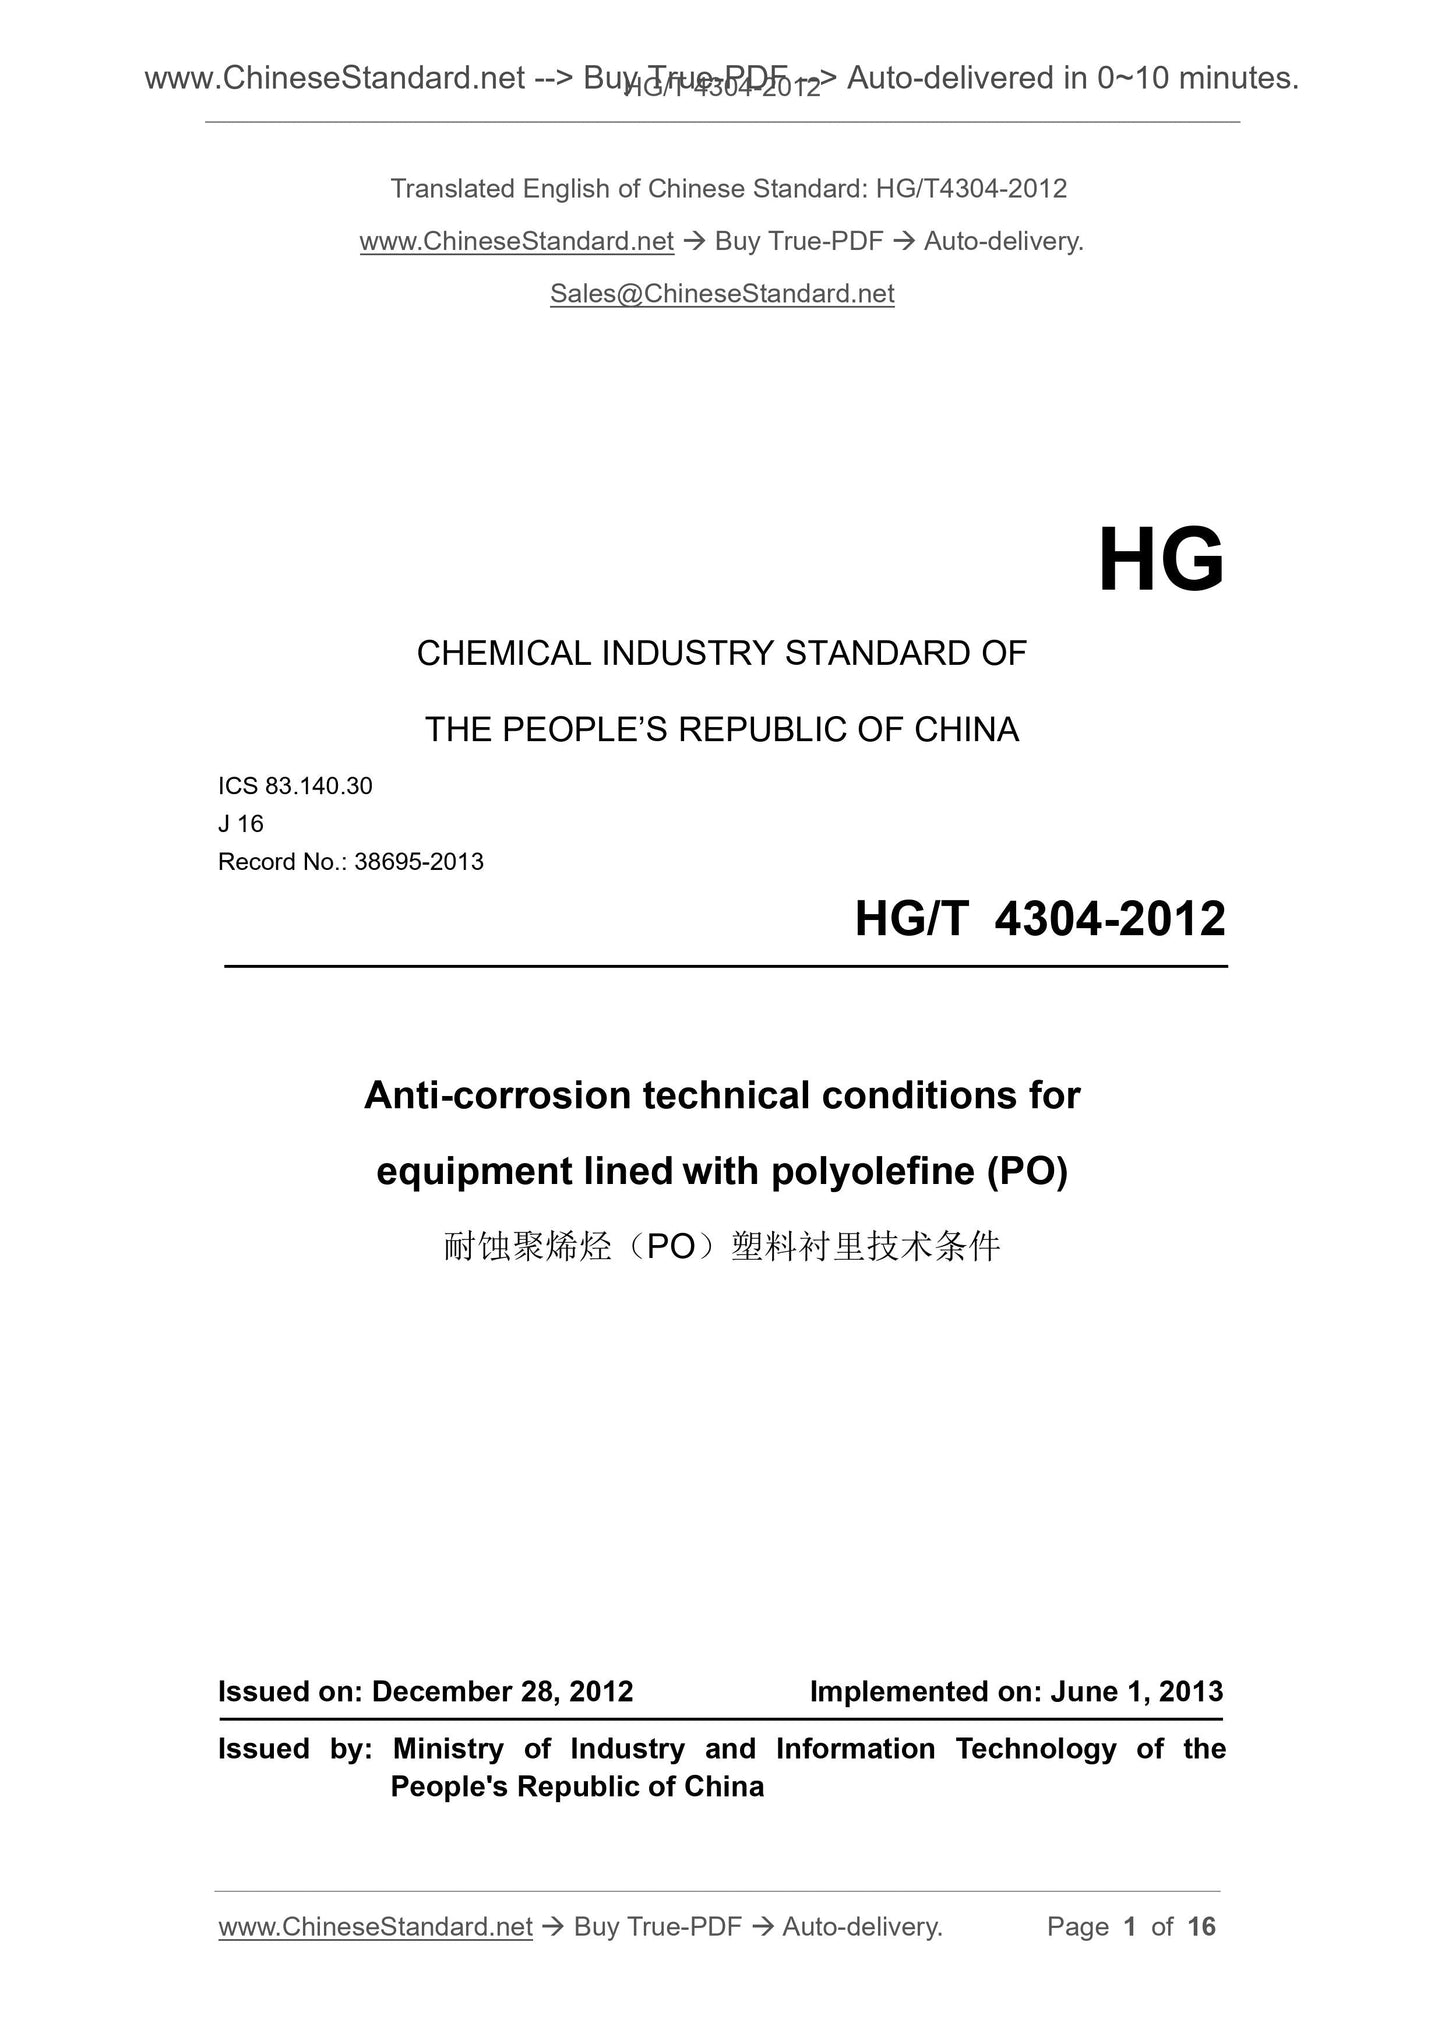 HG/T 4304-2012 Page 1